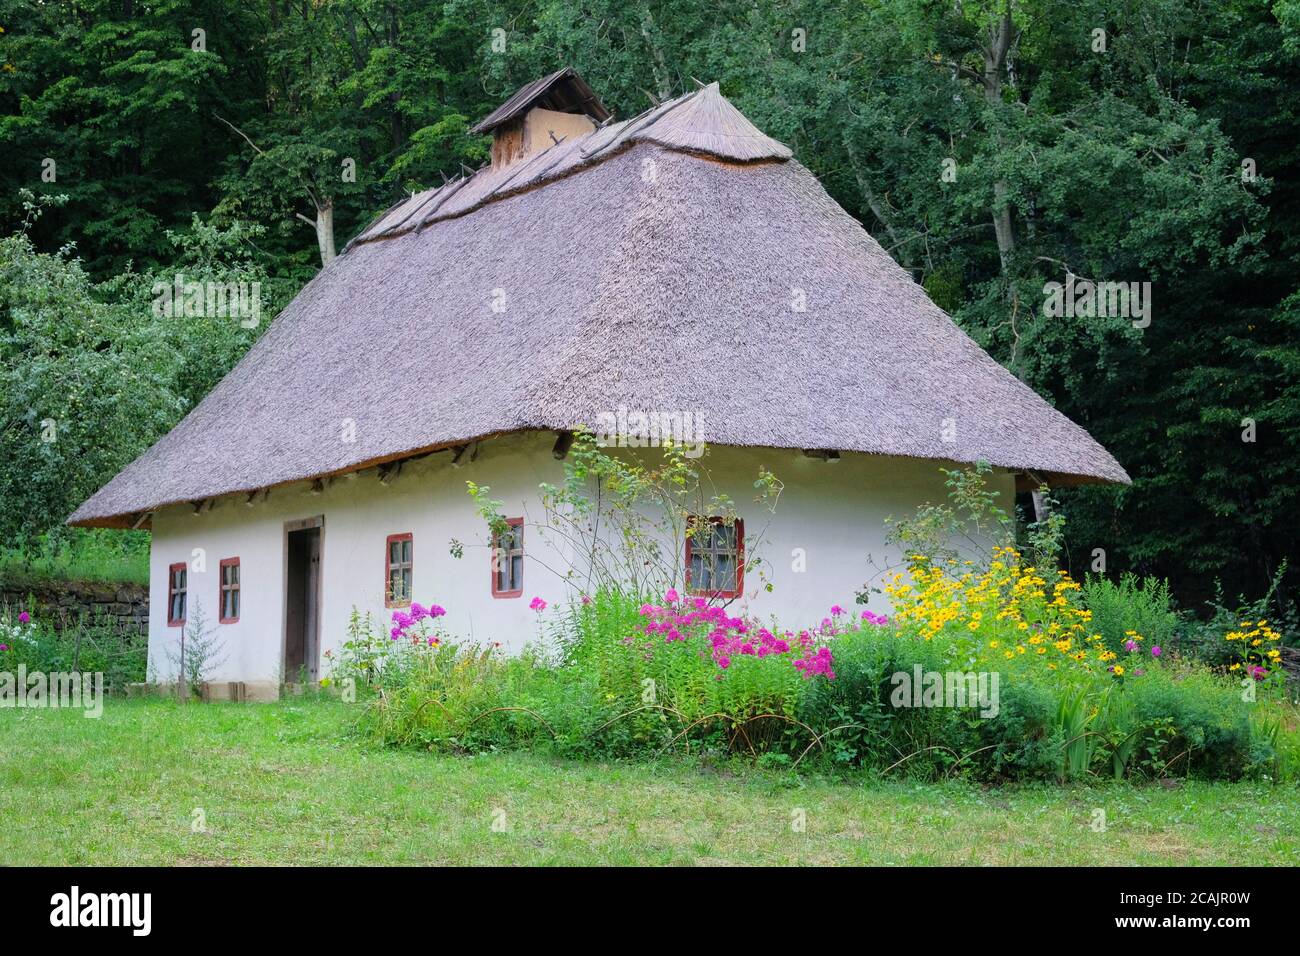 Old rural house with thatched roof and whitewashed walls. Historical village in Ukraine, preserving traditions and culture. Stock Photo